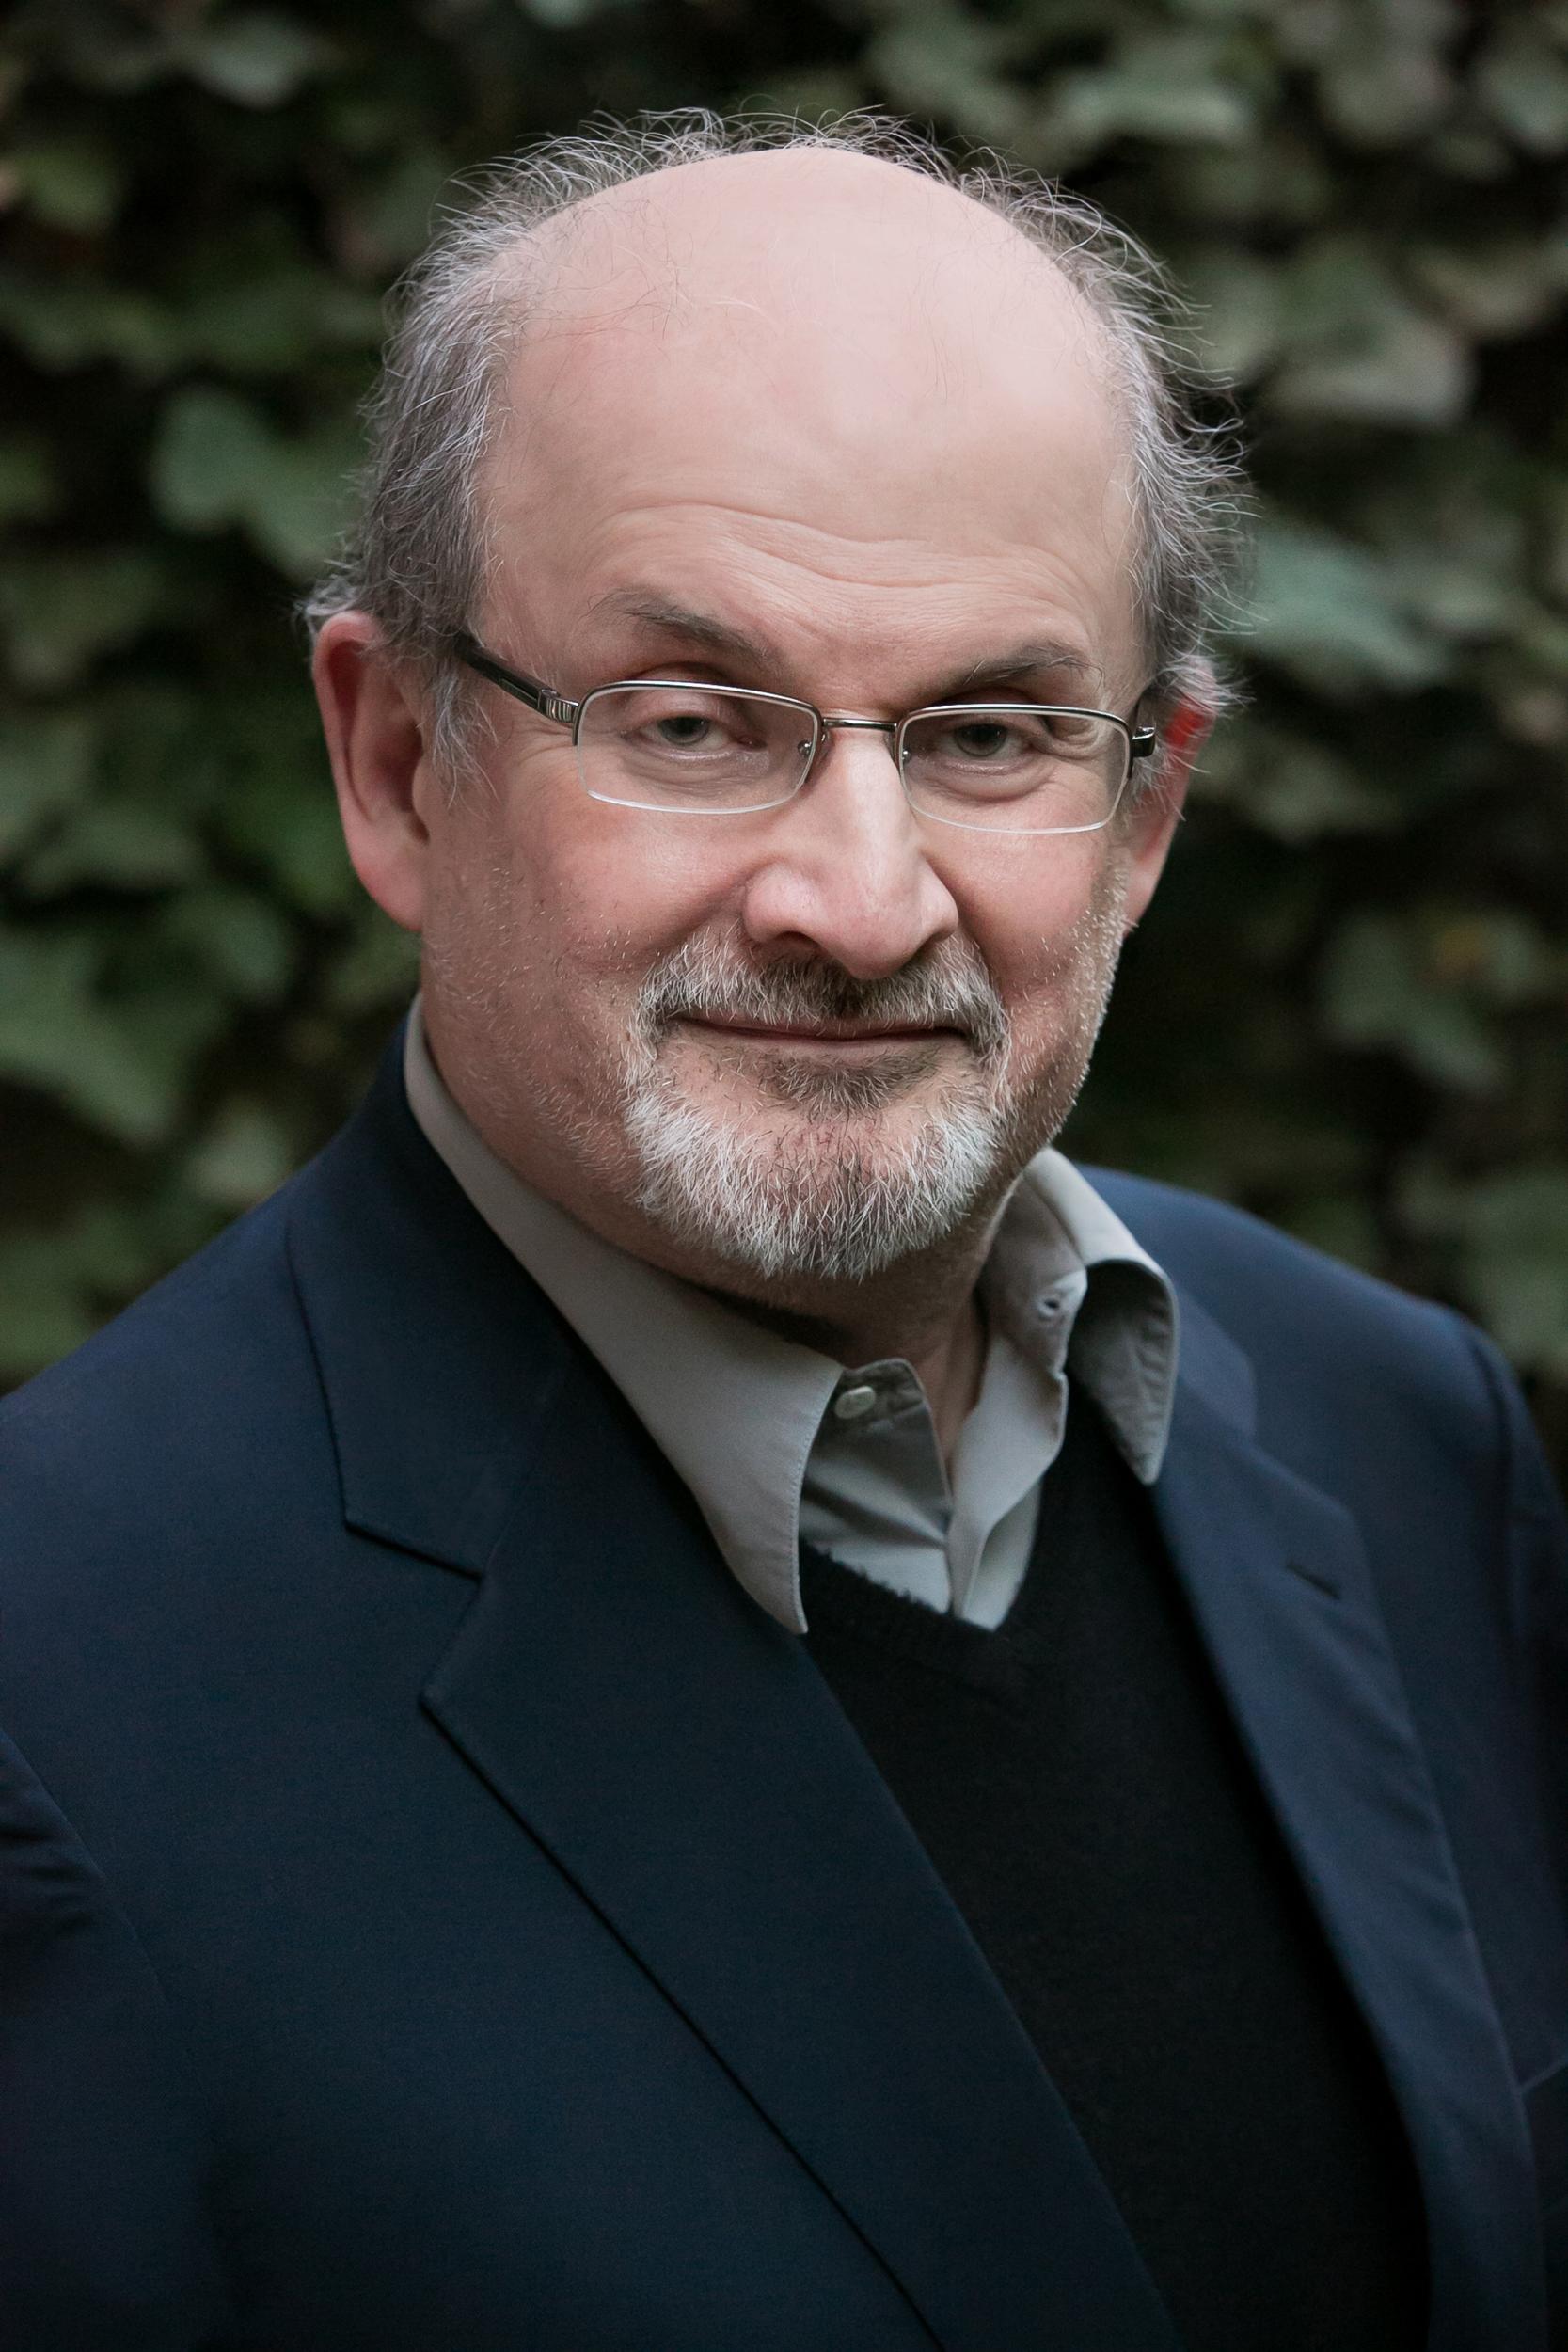 Salman Rushdie ‘s book ‘Quichotte‘ has made it on to the Booker Prize shortlist